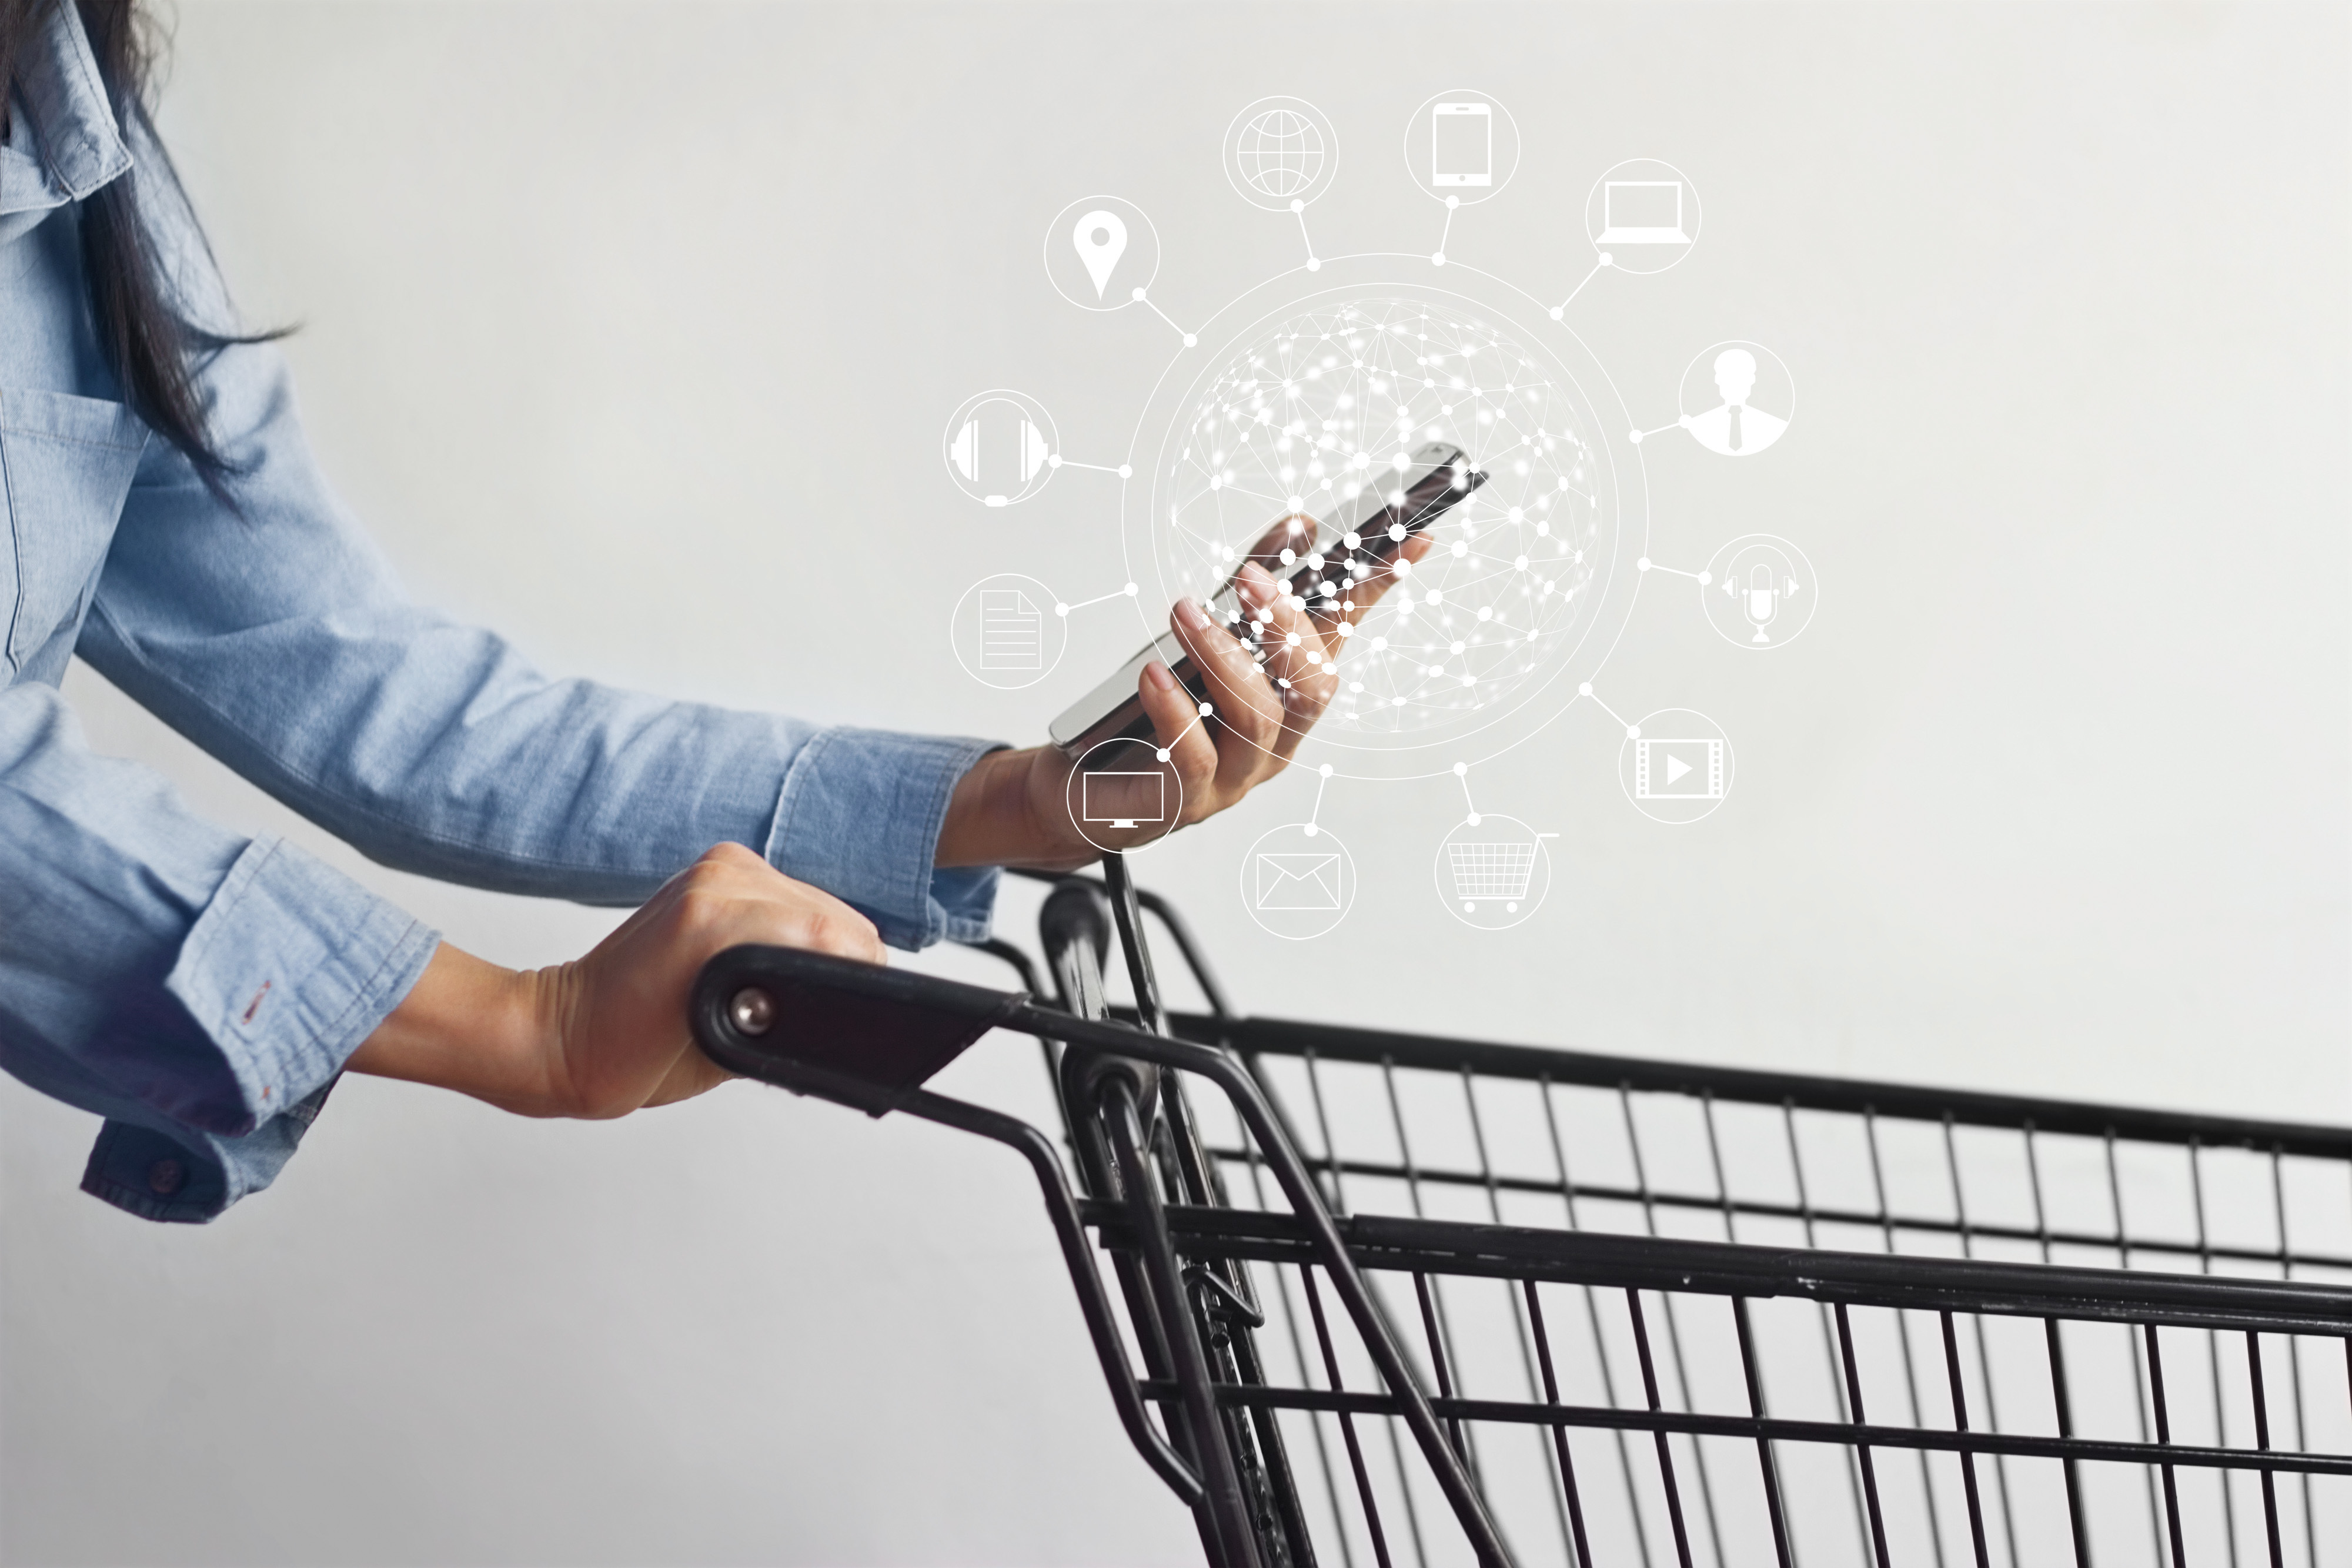 omni-channel retailing in an e-retail world